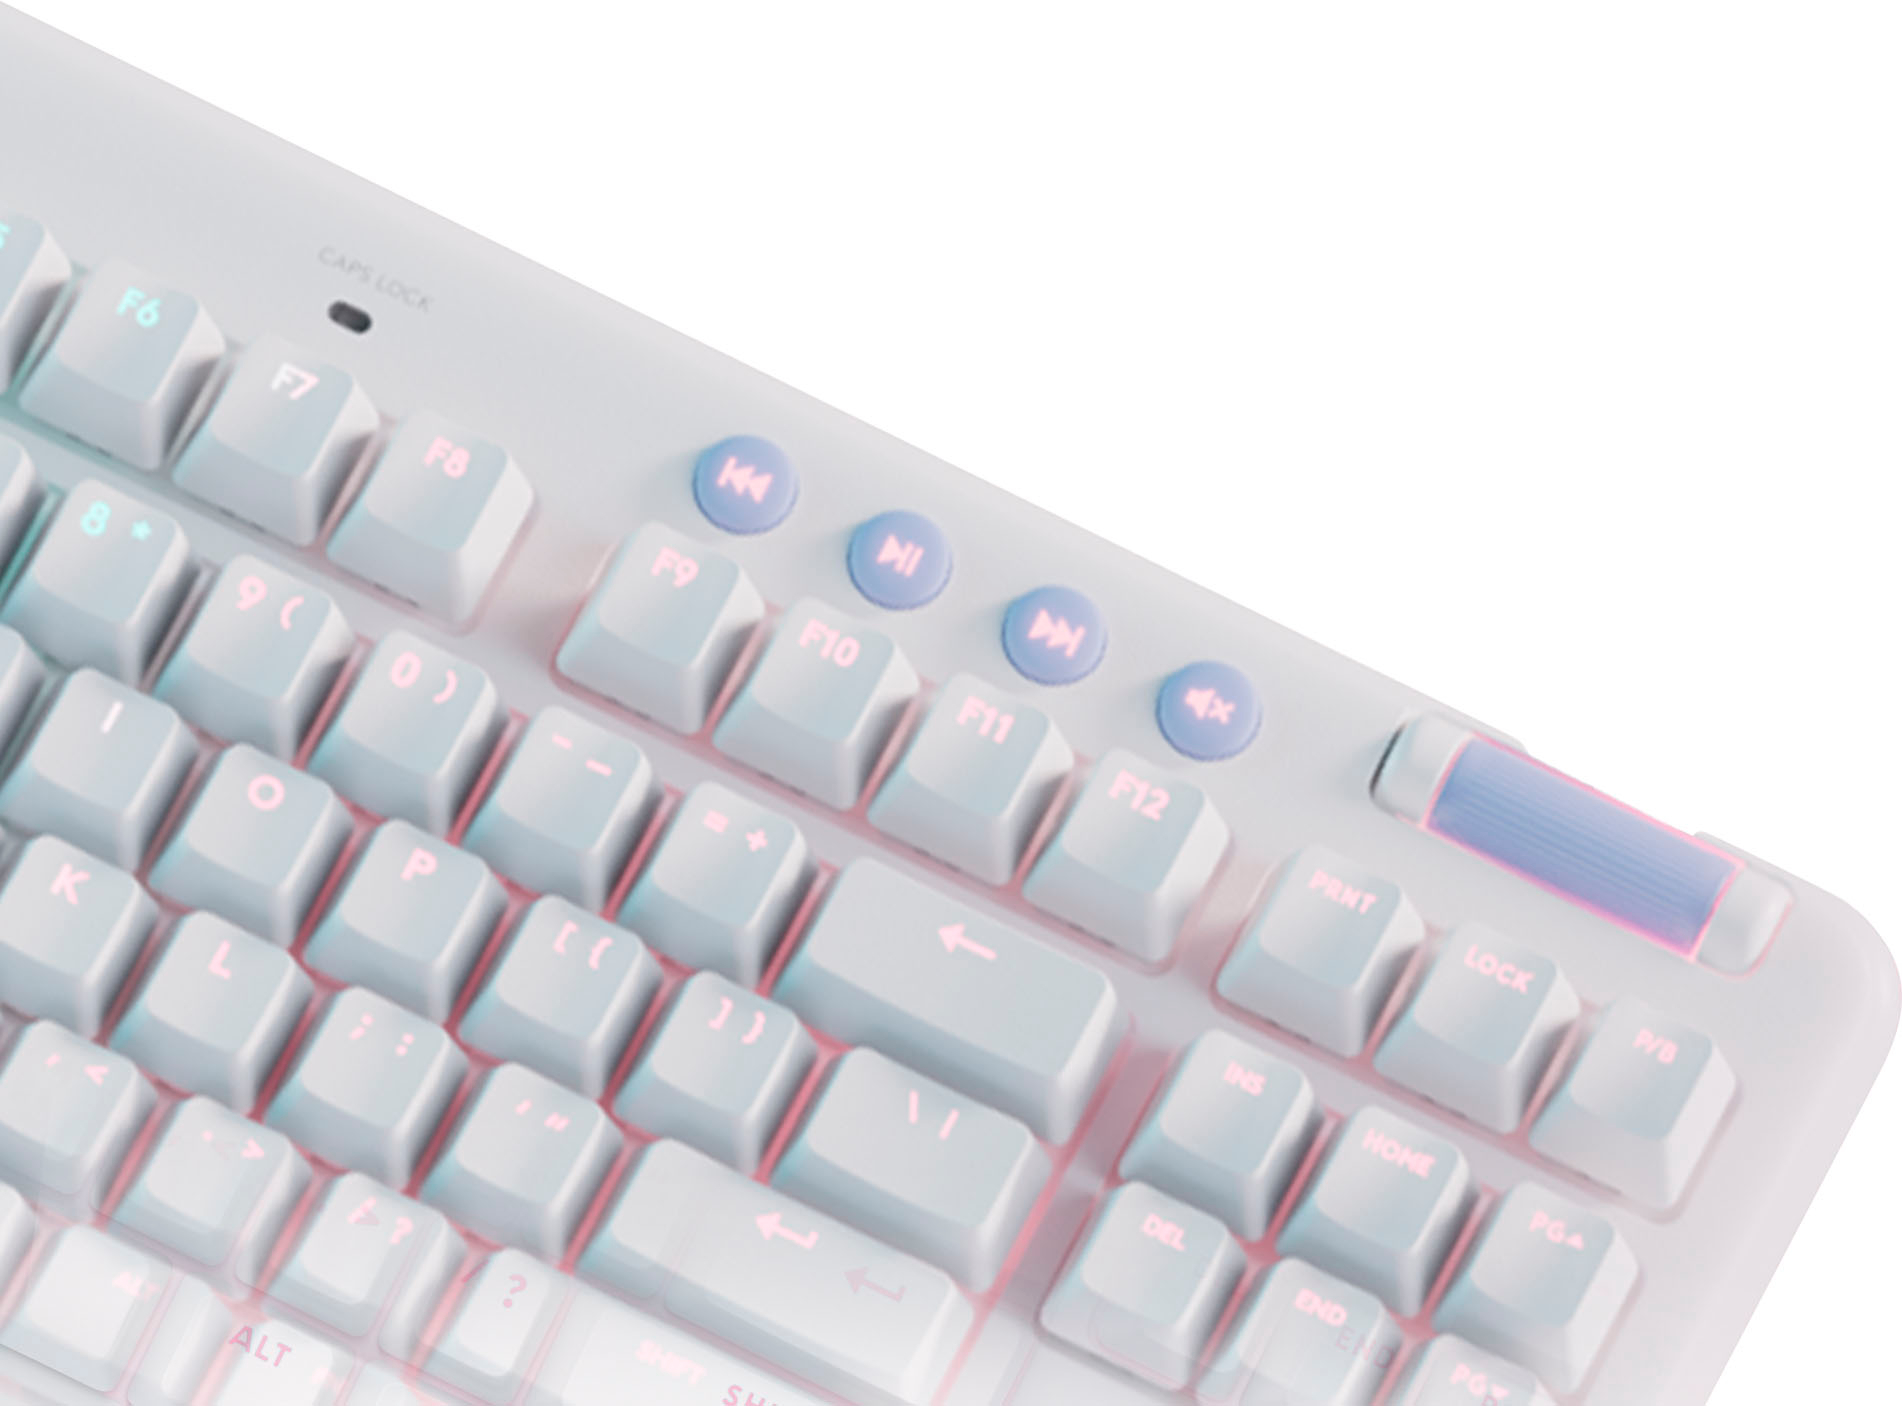 Logitech G715 TKL Aurora Collection Wireless Mechanical Gaming Keyboard -  White, US English (Clicky Switches) for sale online